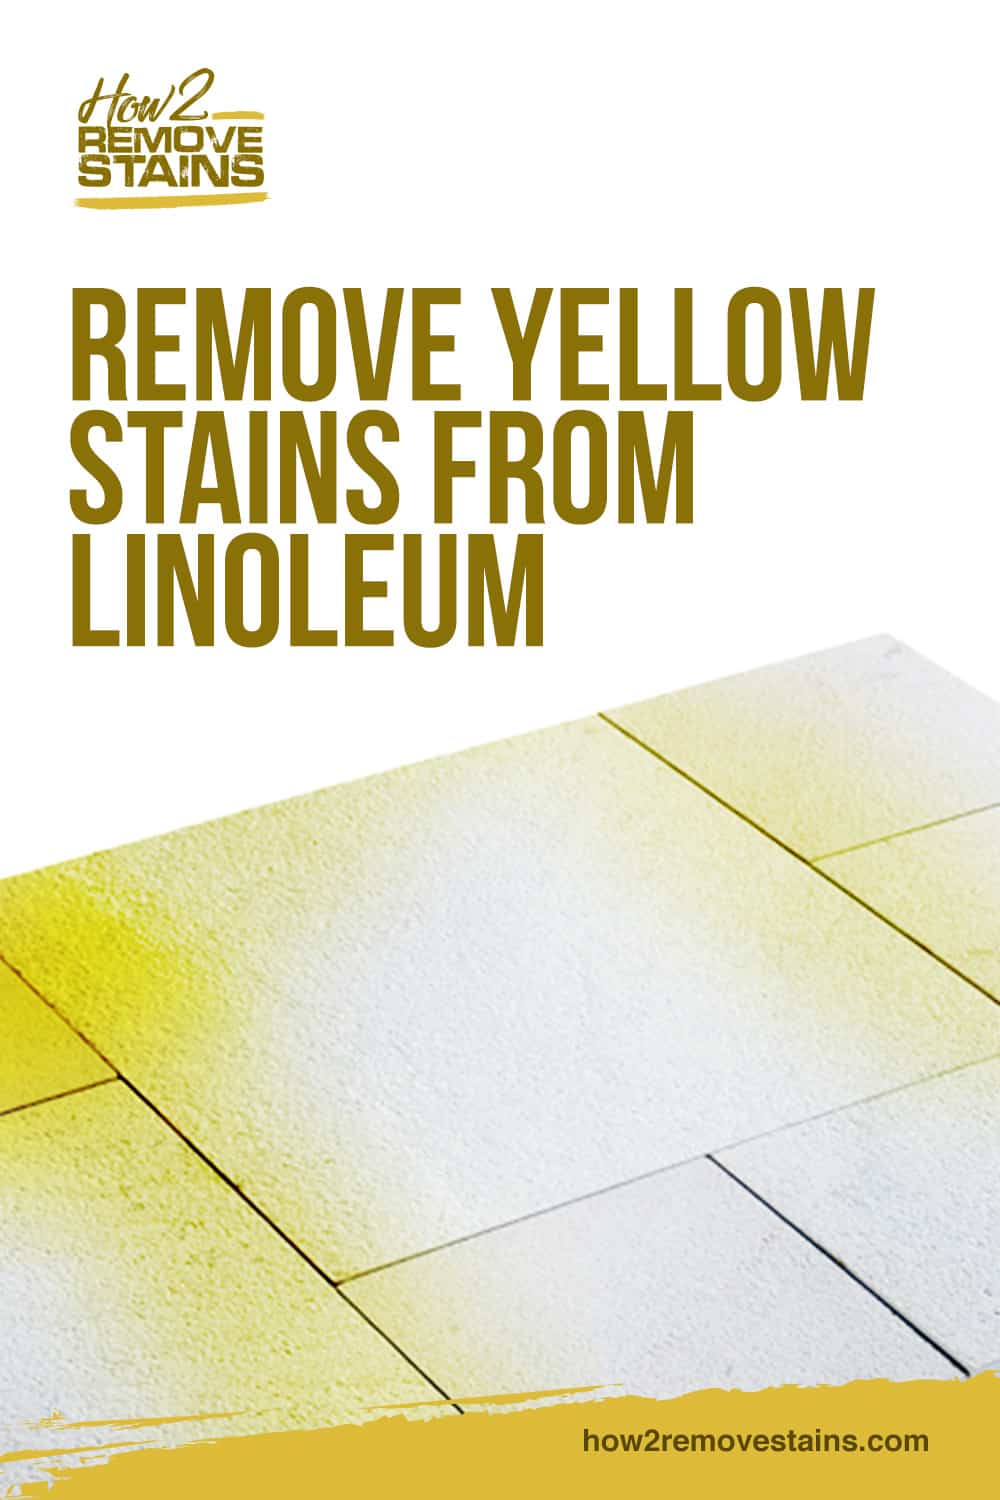 Remove Yellow Stains From Linoleum, How To Fix Yellowing Vinyl Flooring